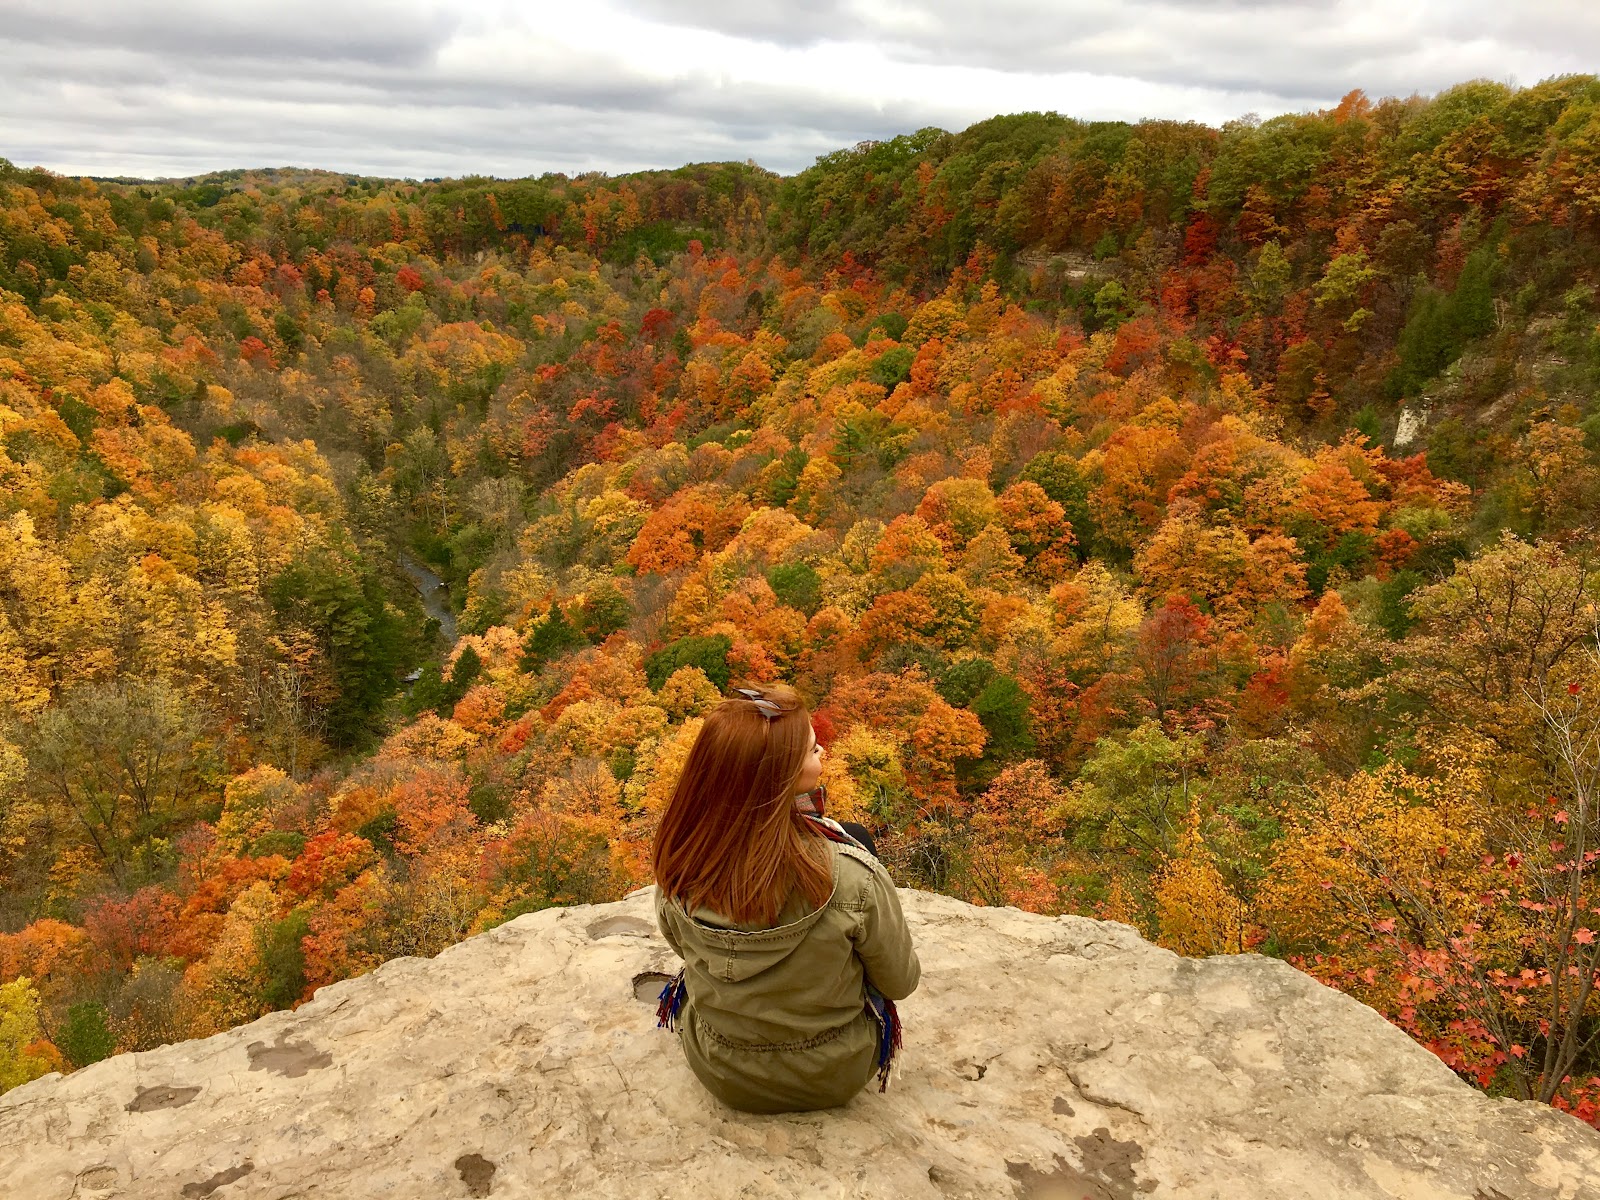 places to see fall foliage